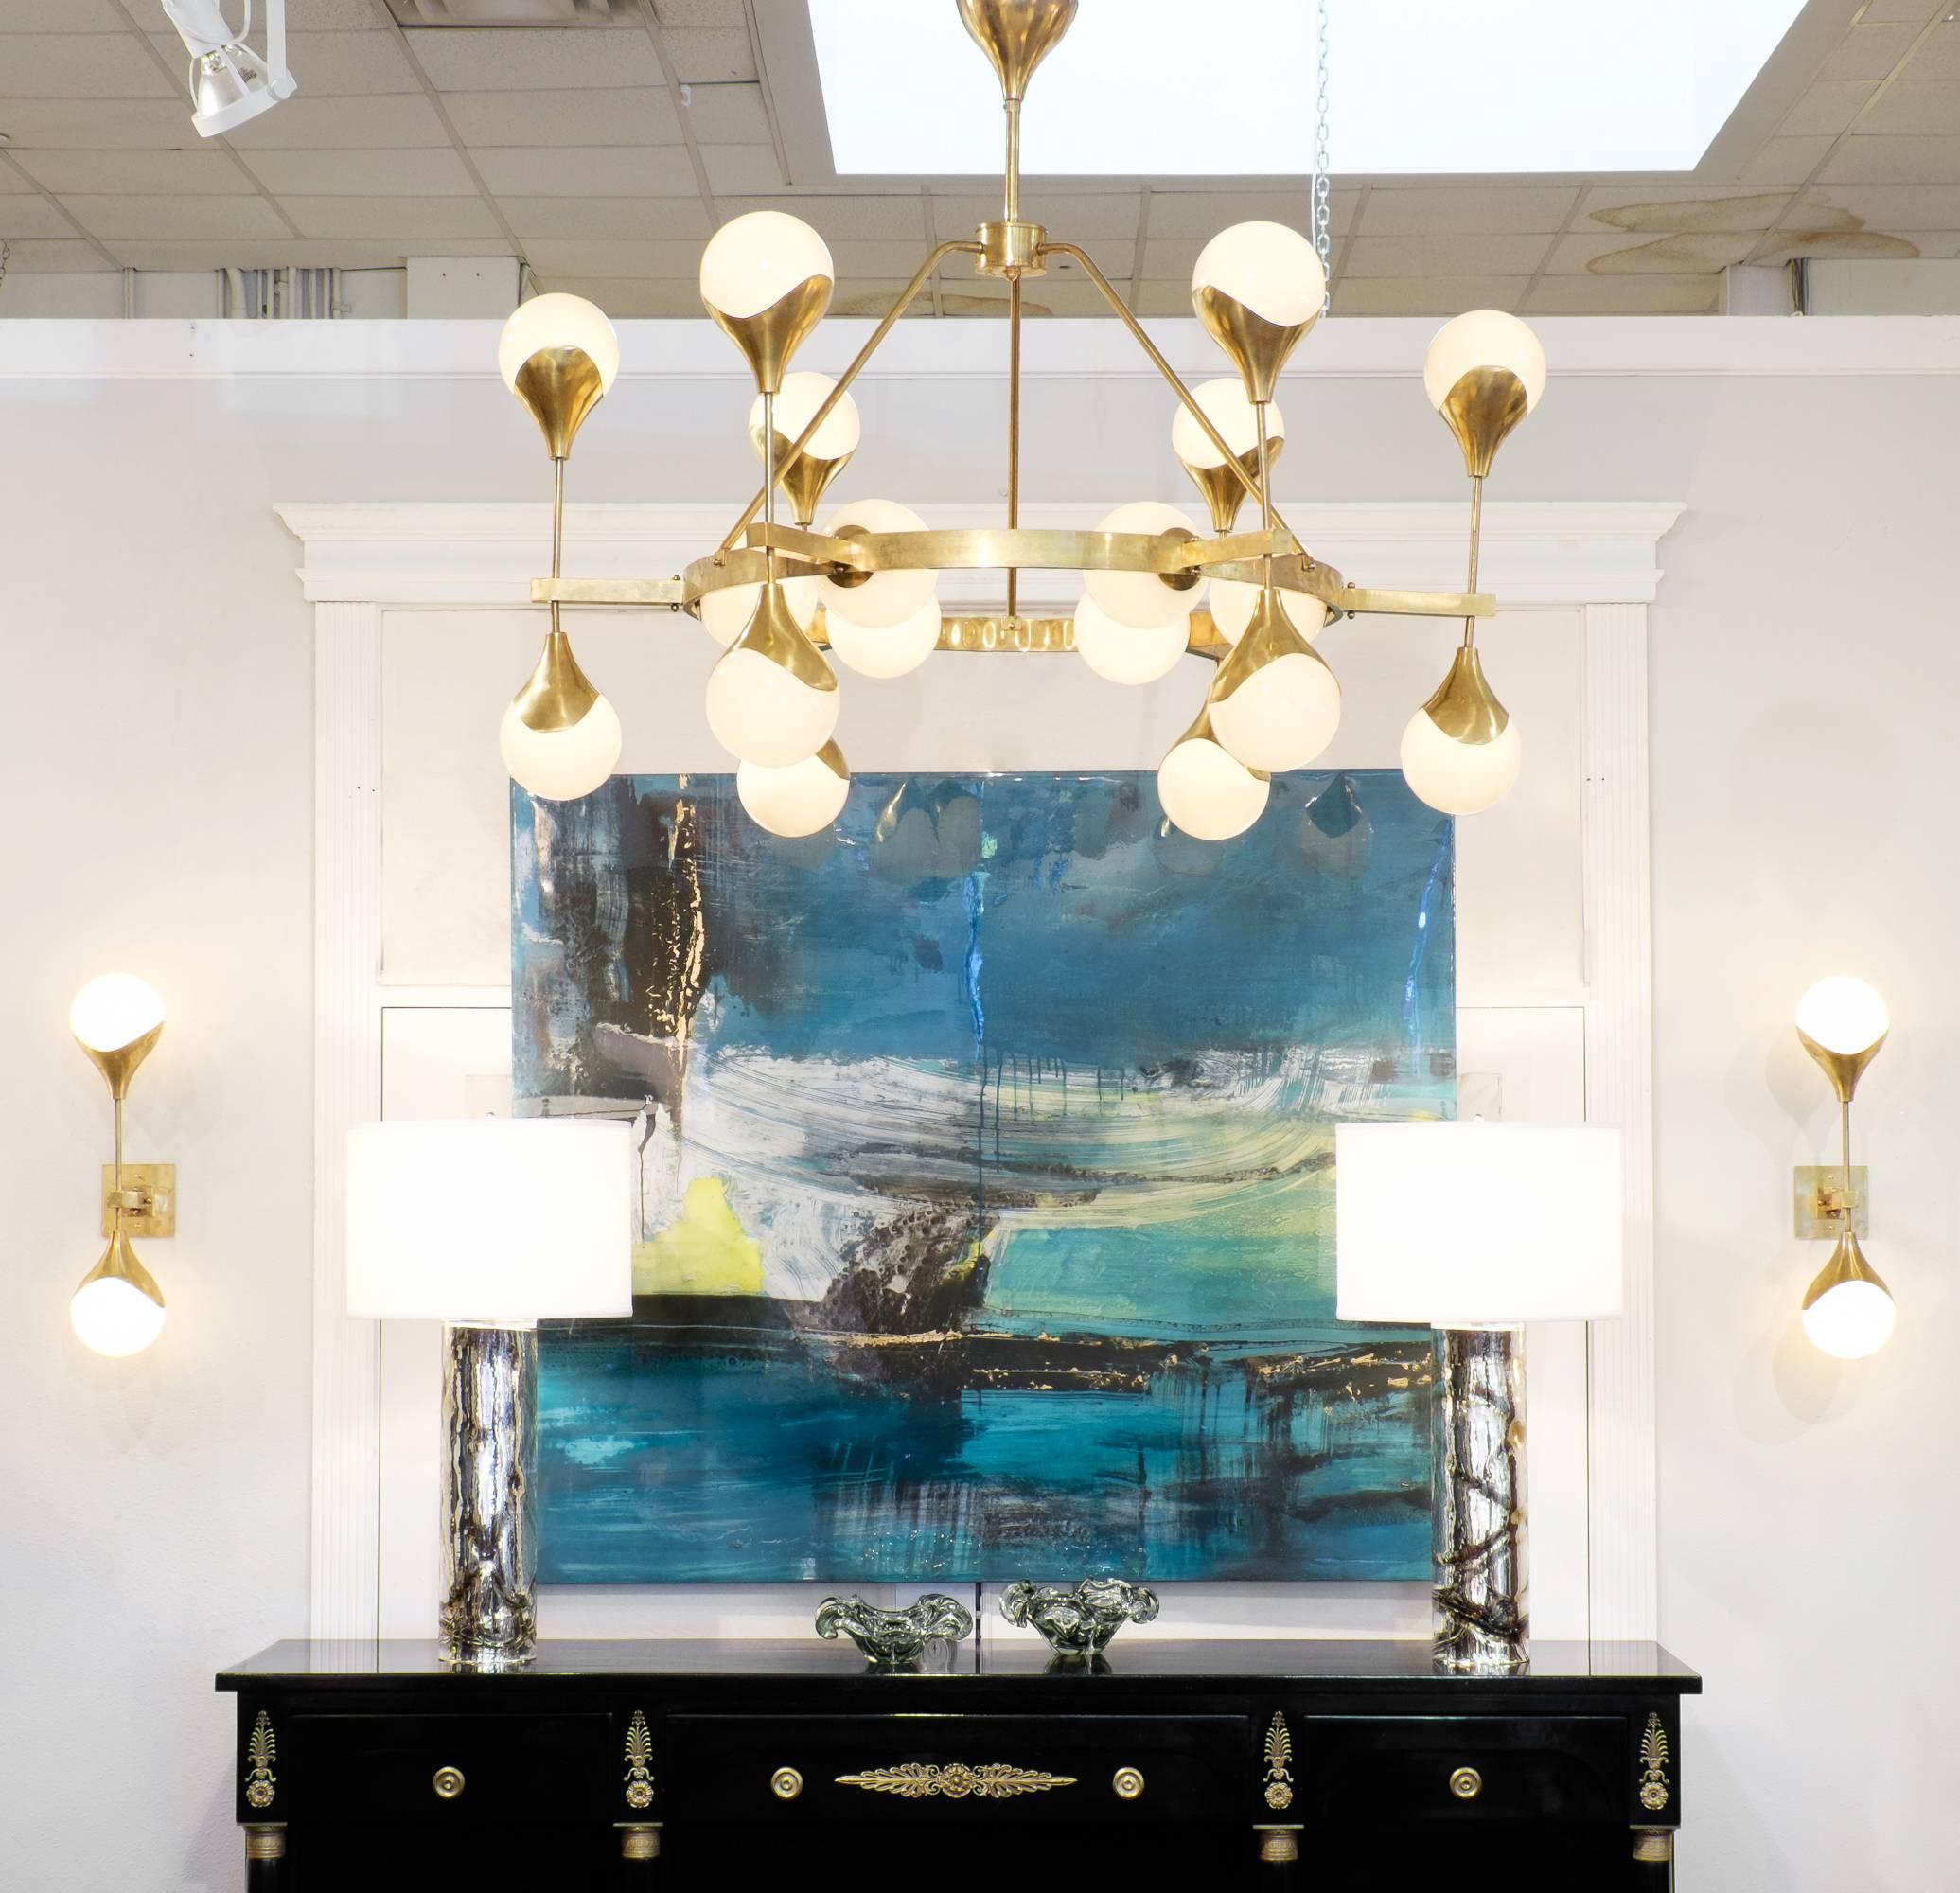 Italian pair of Mid-Century Modern style sconces in brass with pearl translucent glass shades. These wall sconces are a statement piece, radiating beauty on or off. Each sconce requires two candelabra-base bulbs, and is wired to fit US